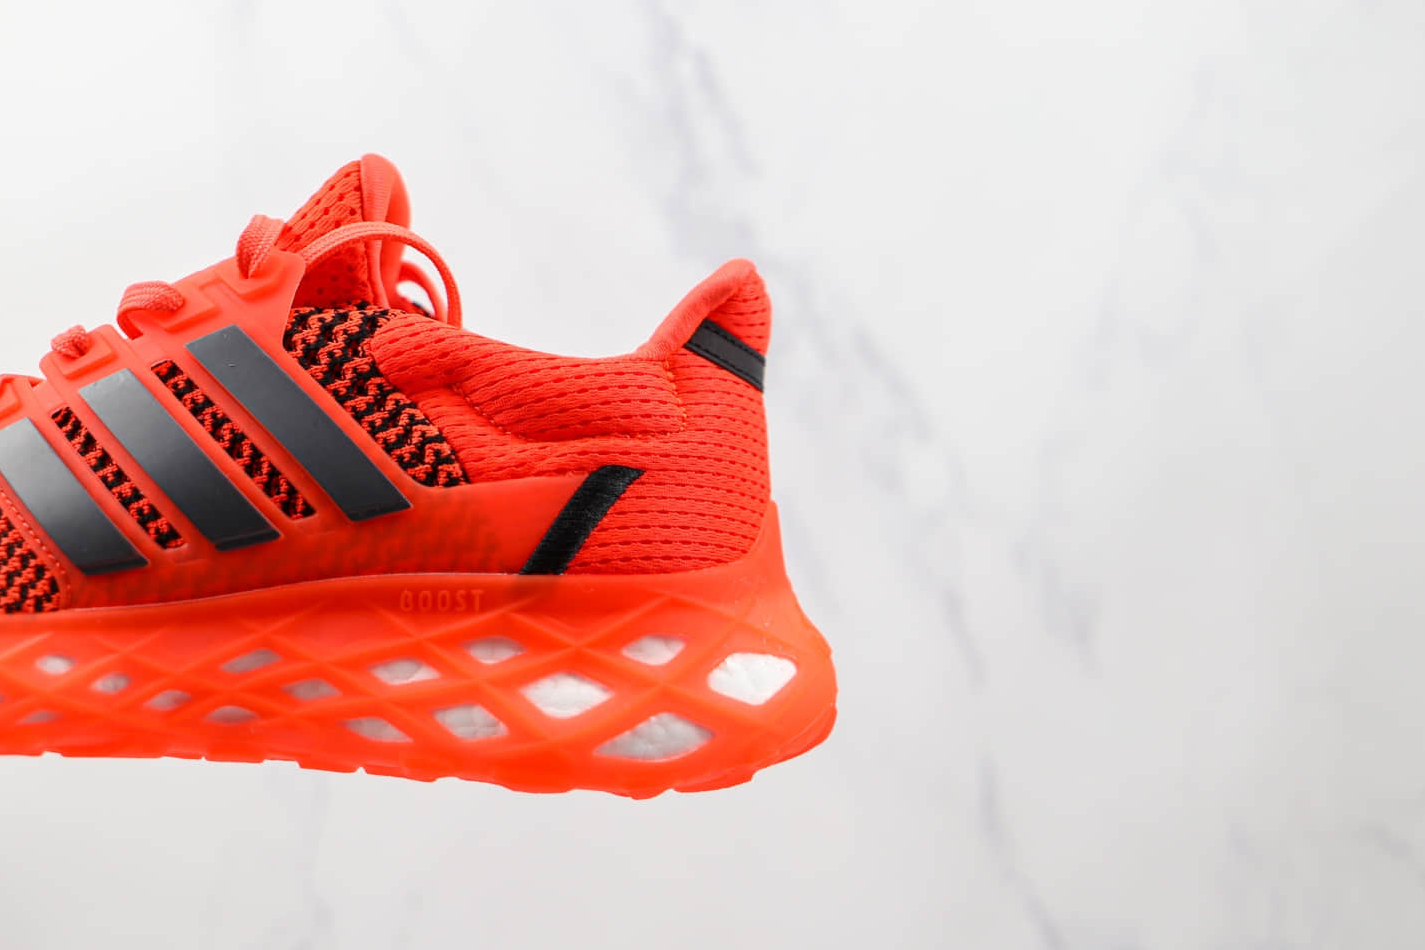 Adidas Ultraboost Web DNA Solar Red | GY4171 | Limited Edition